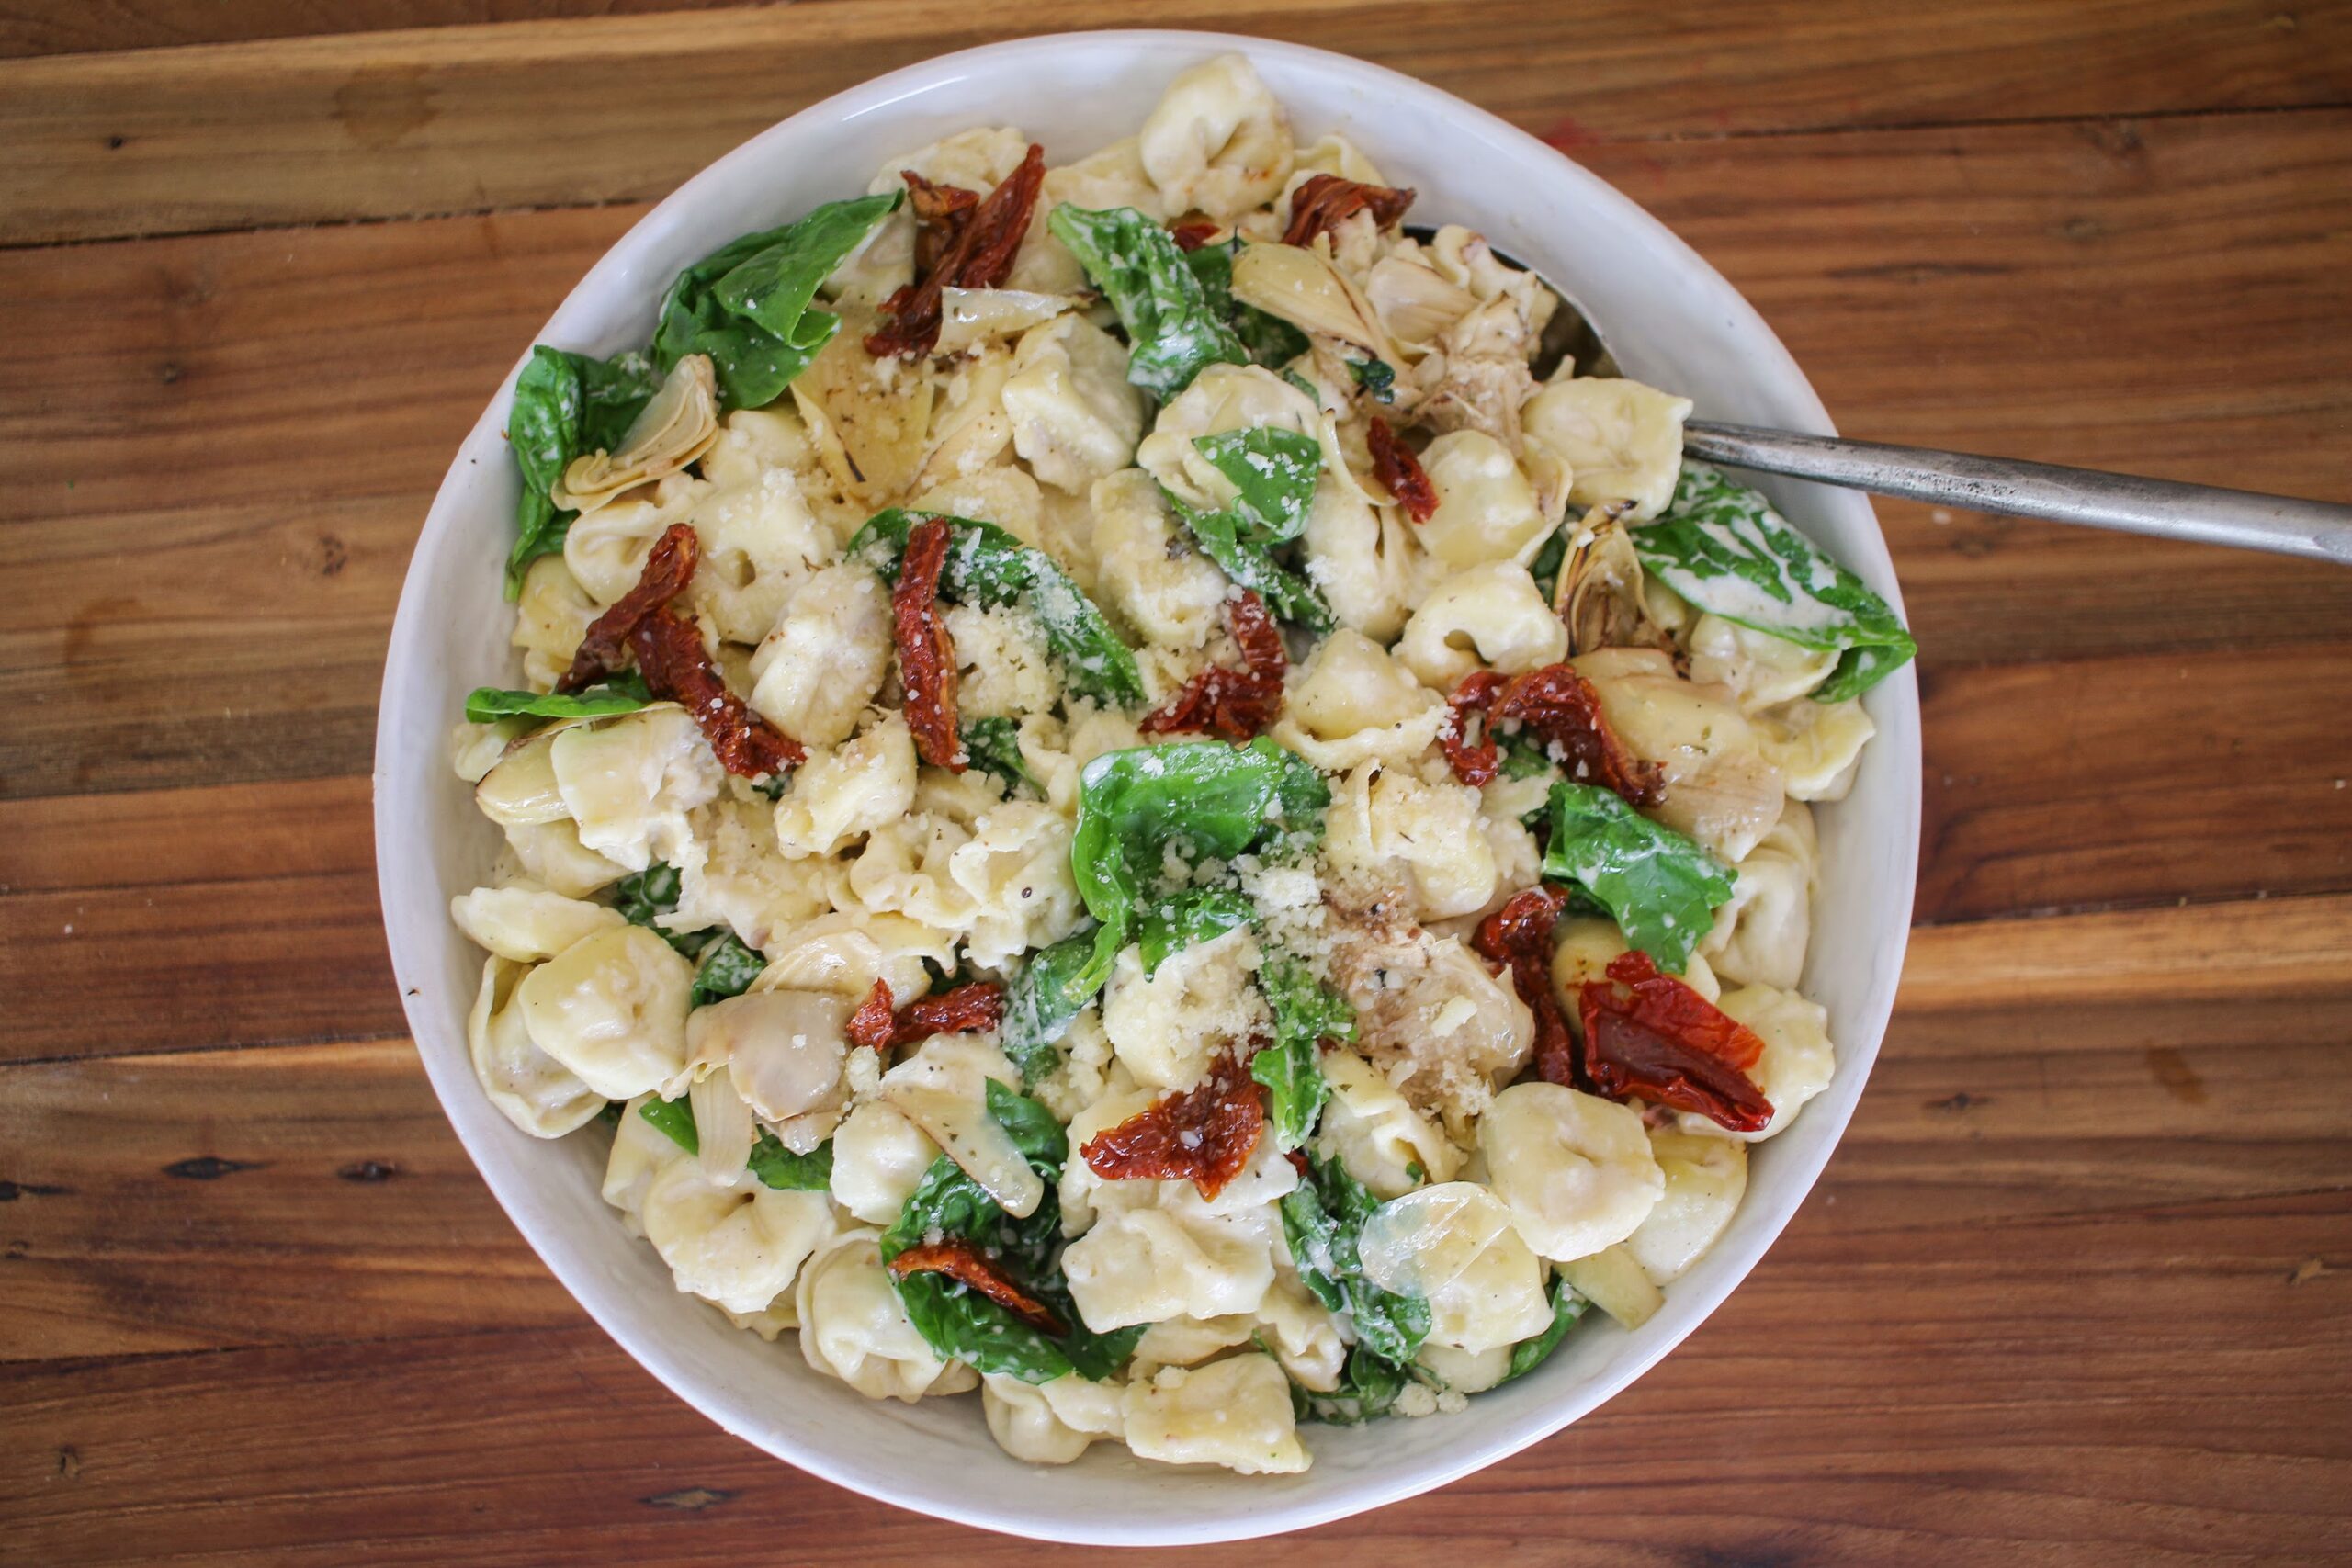 A bowl of pasta salad with bacon and spinach.